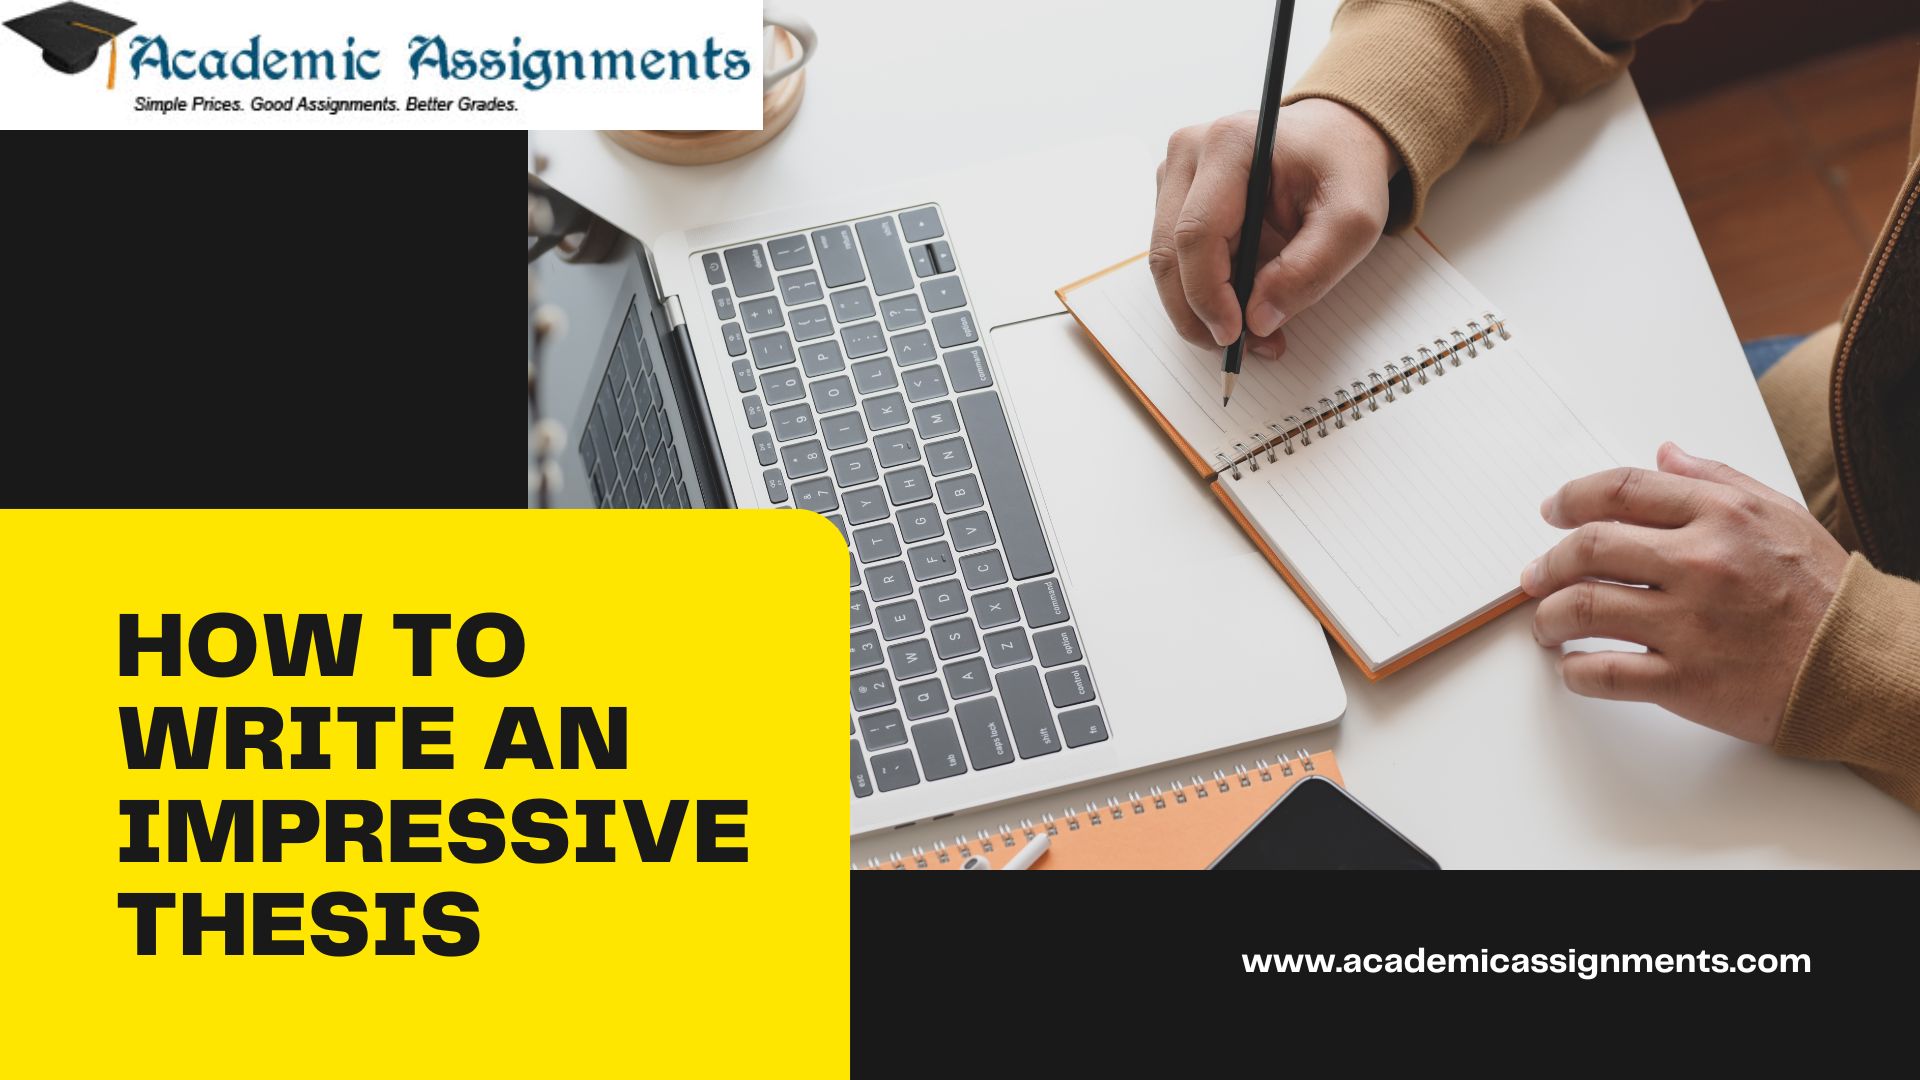 HOW TO WRITE AN IMPRESSIVE THESIS